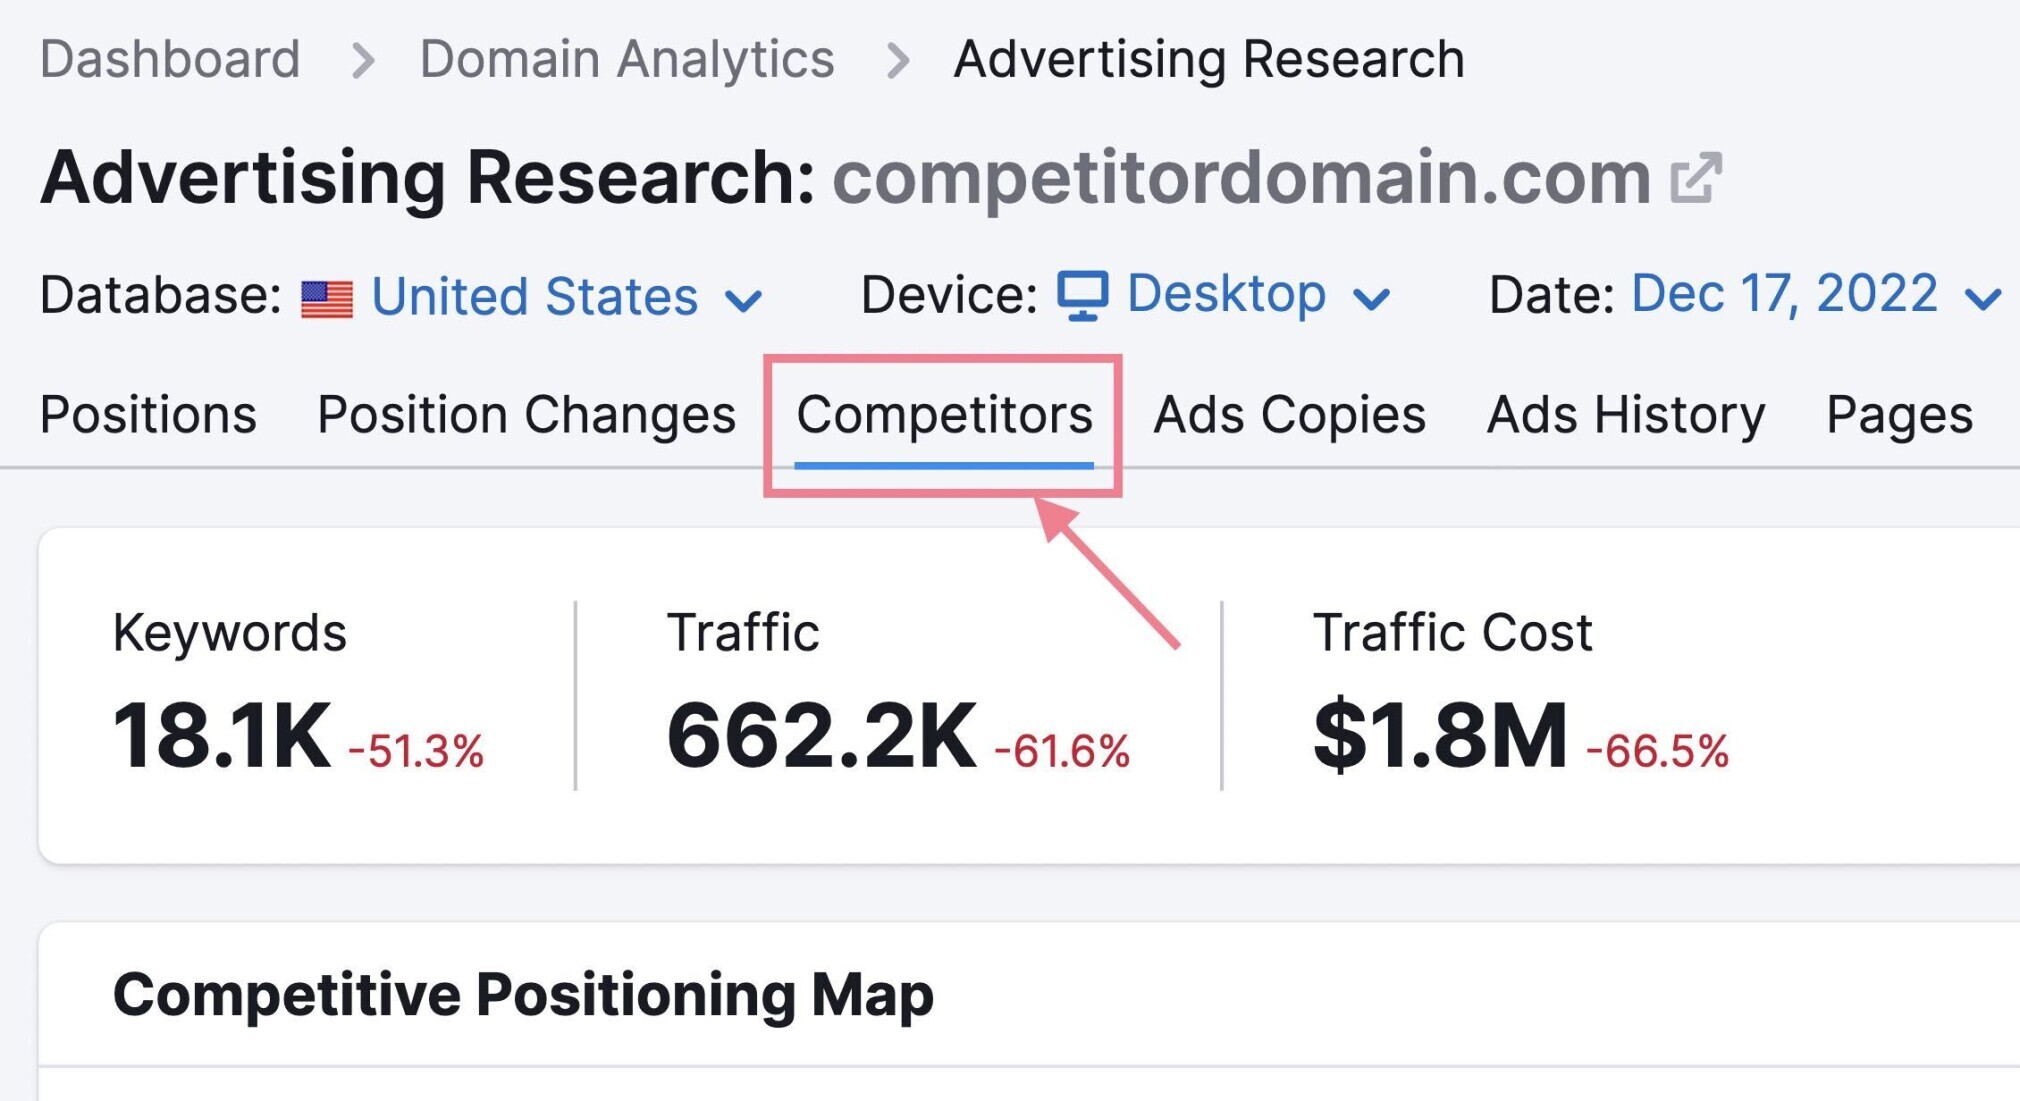 Advertising research competitors for eBay.